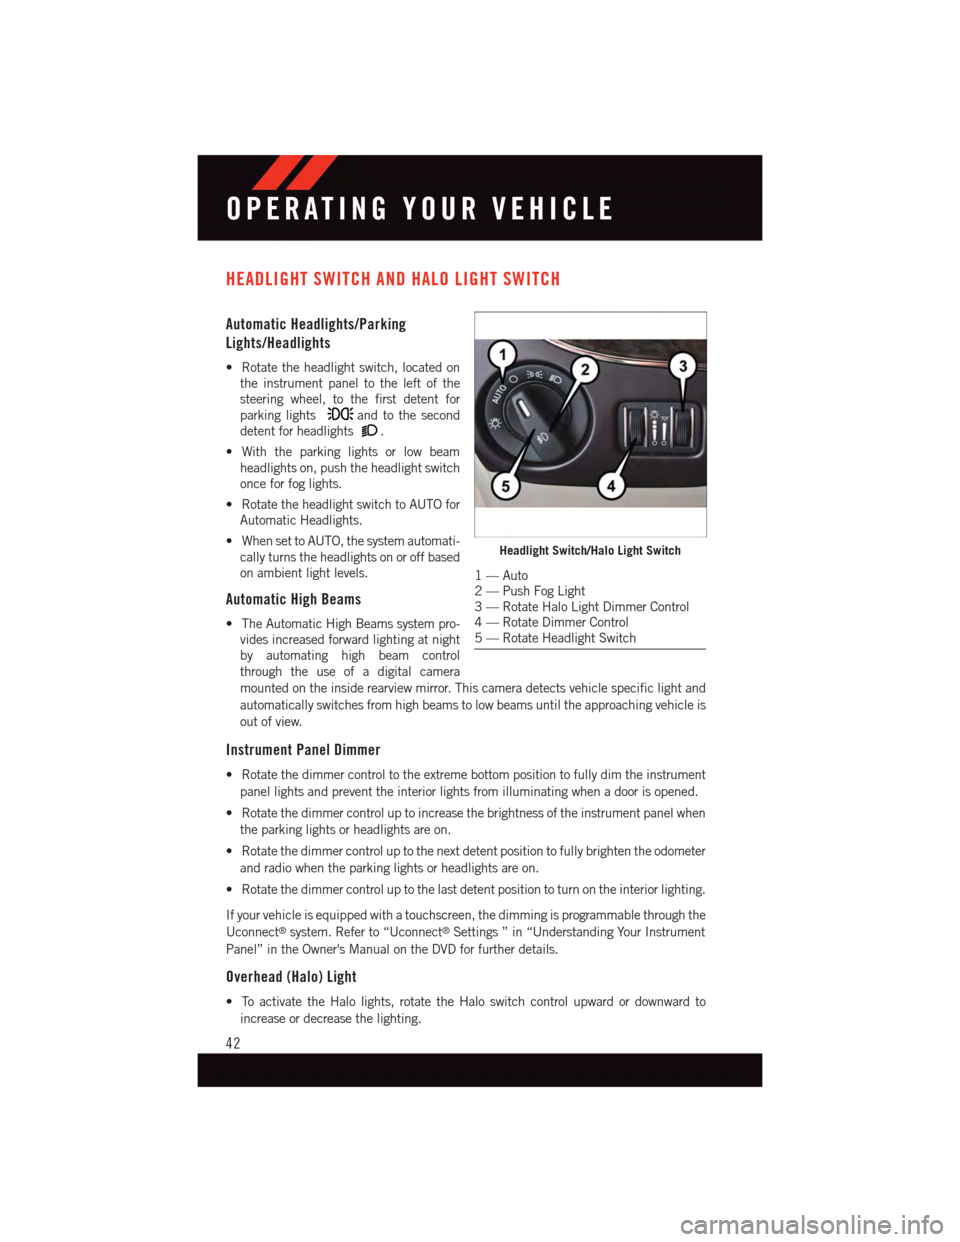 DODGE GRAND CARAVAN 2015 5.G User Guide HEADLIGHT SWITCH AND HALO LIGHT SWITCH
Automatic Headlights/Parking
Lights/Headlights
•Rotatetheheadlightswitch,locatedon
the instrument panel to the left of the
steering wheel, to the first detent 